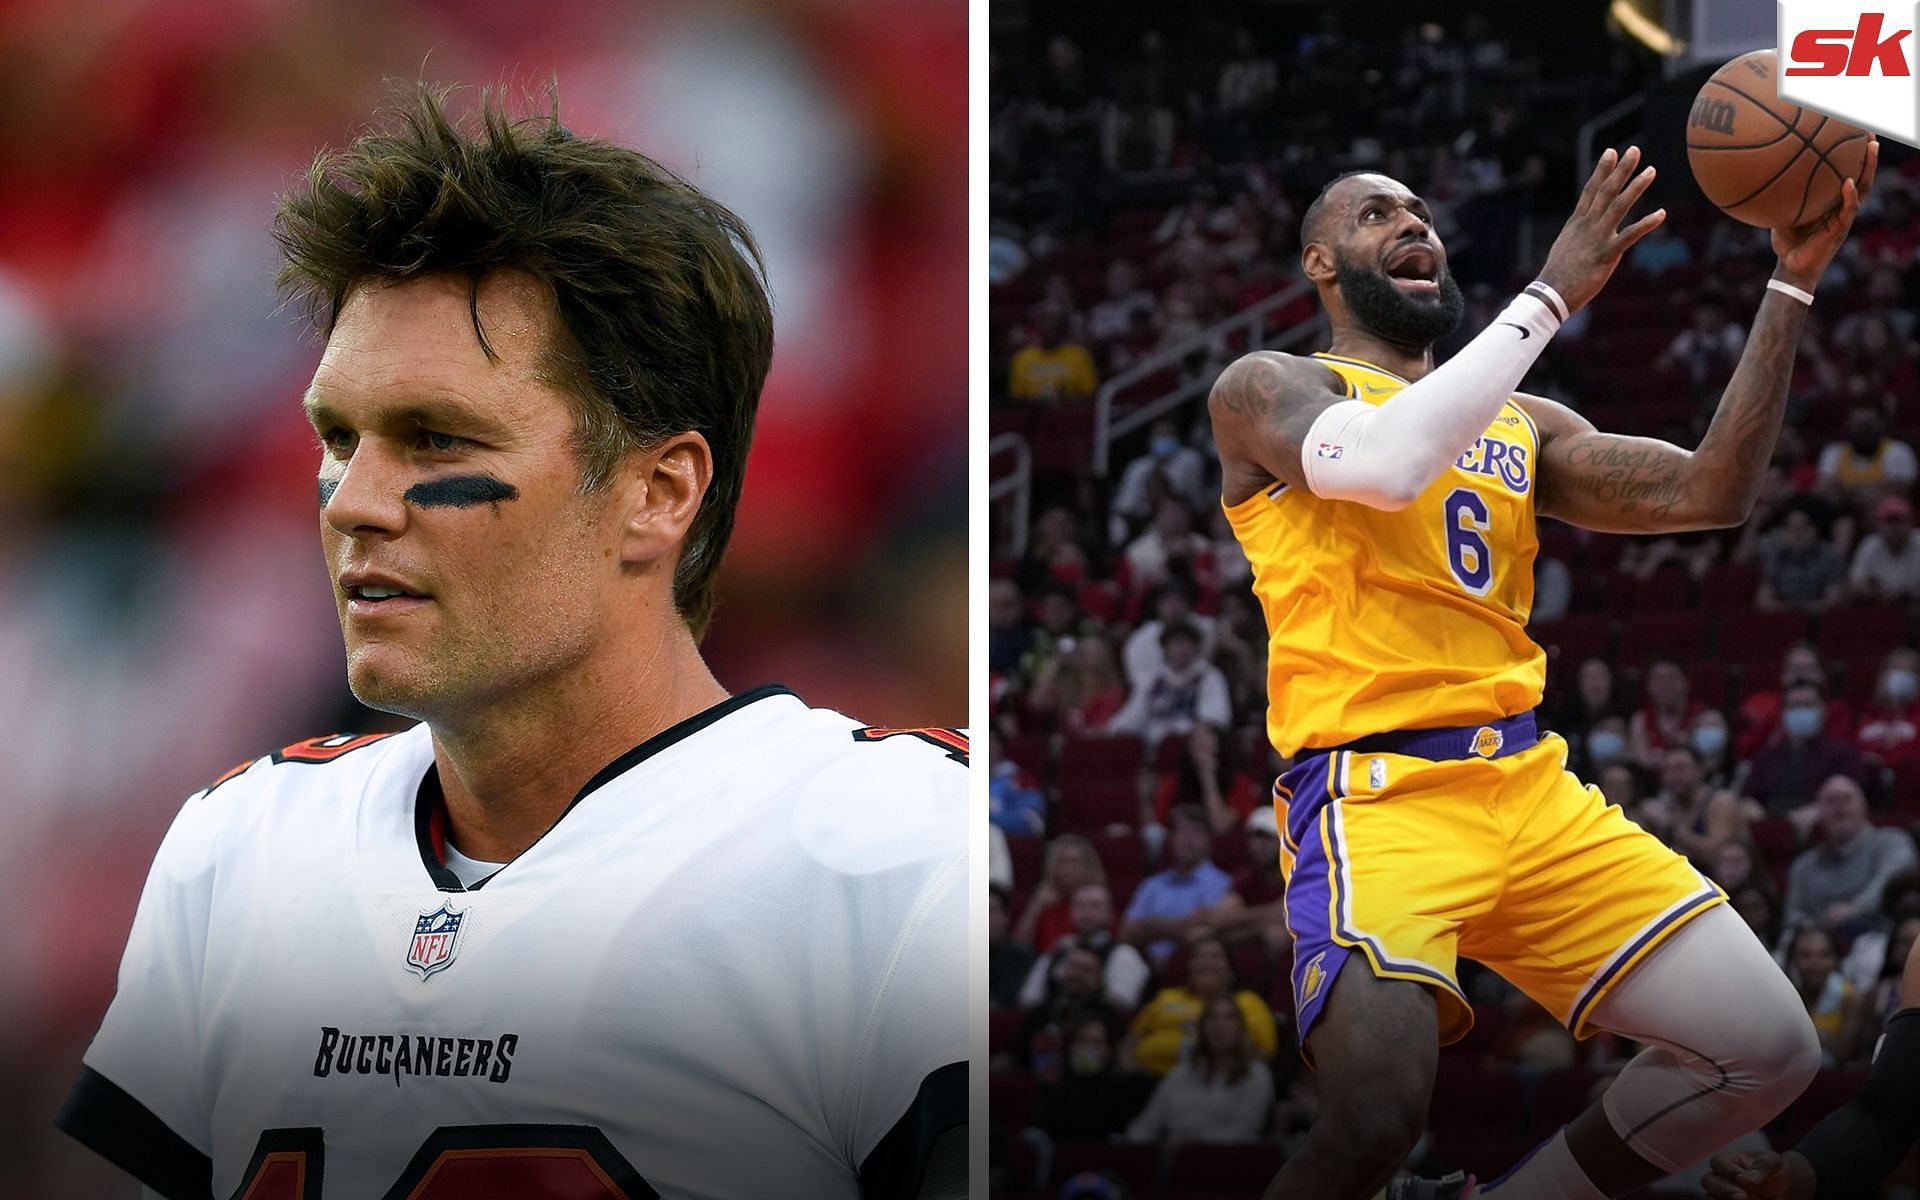 The careers of LeBron James (right) and Tom Brady are often compared.